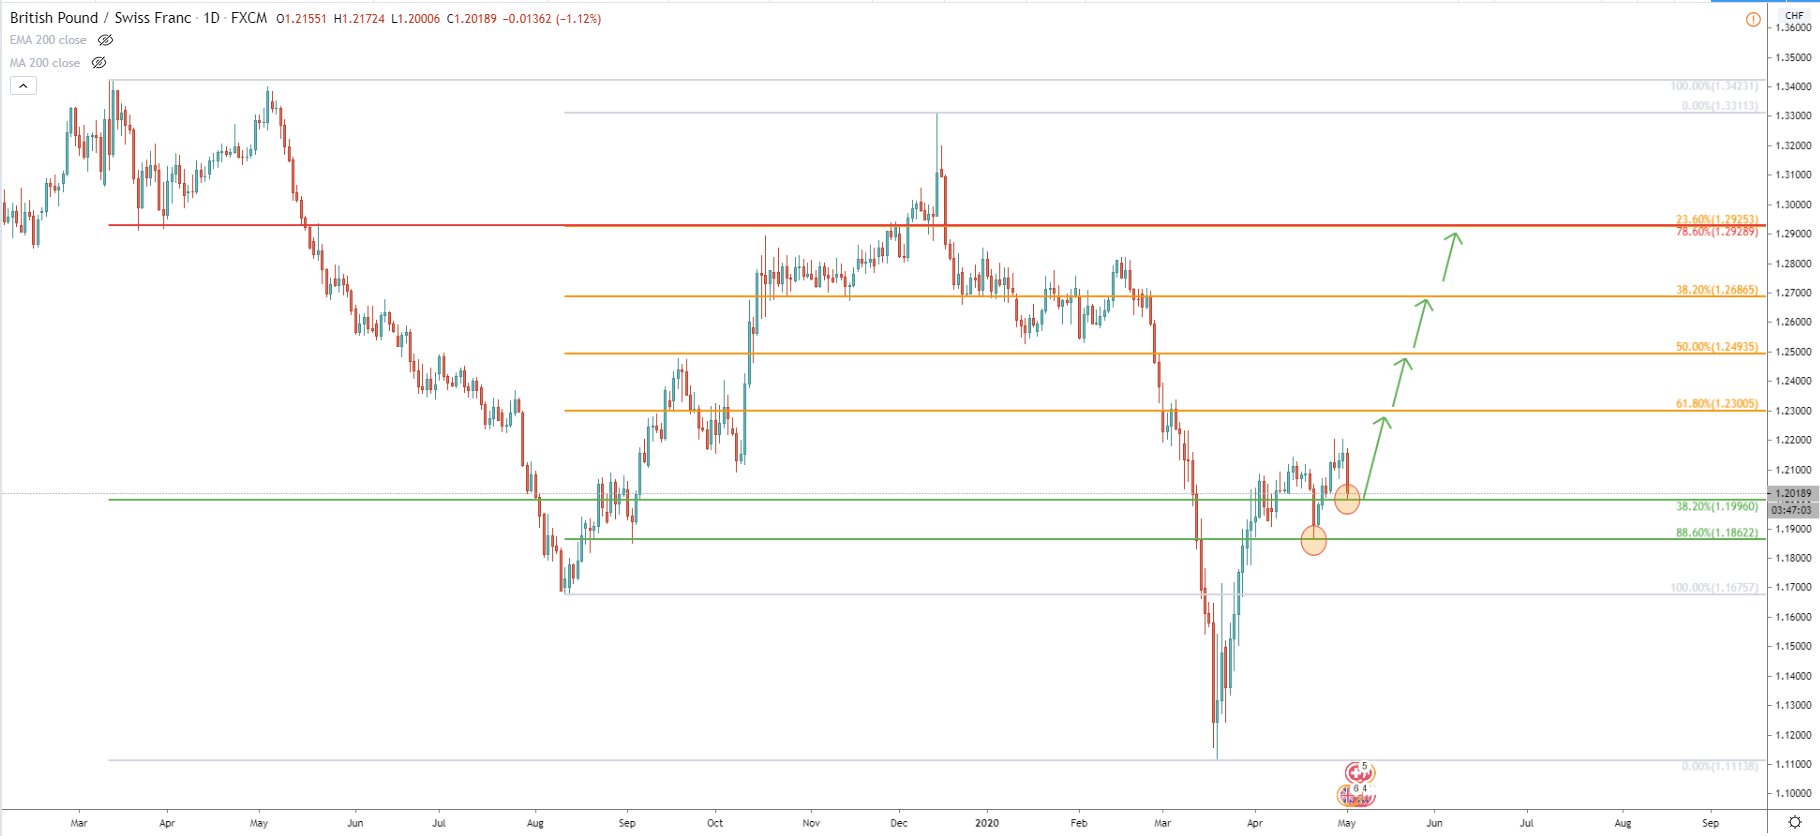 GBP/CHF Daily Technical Analysis 1 May 2020